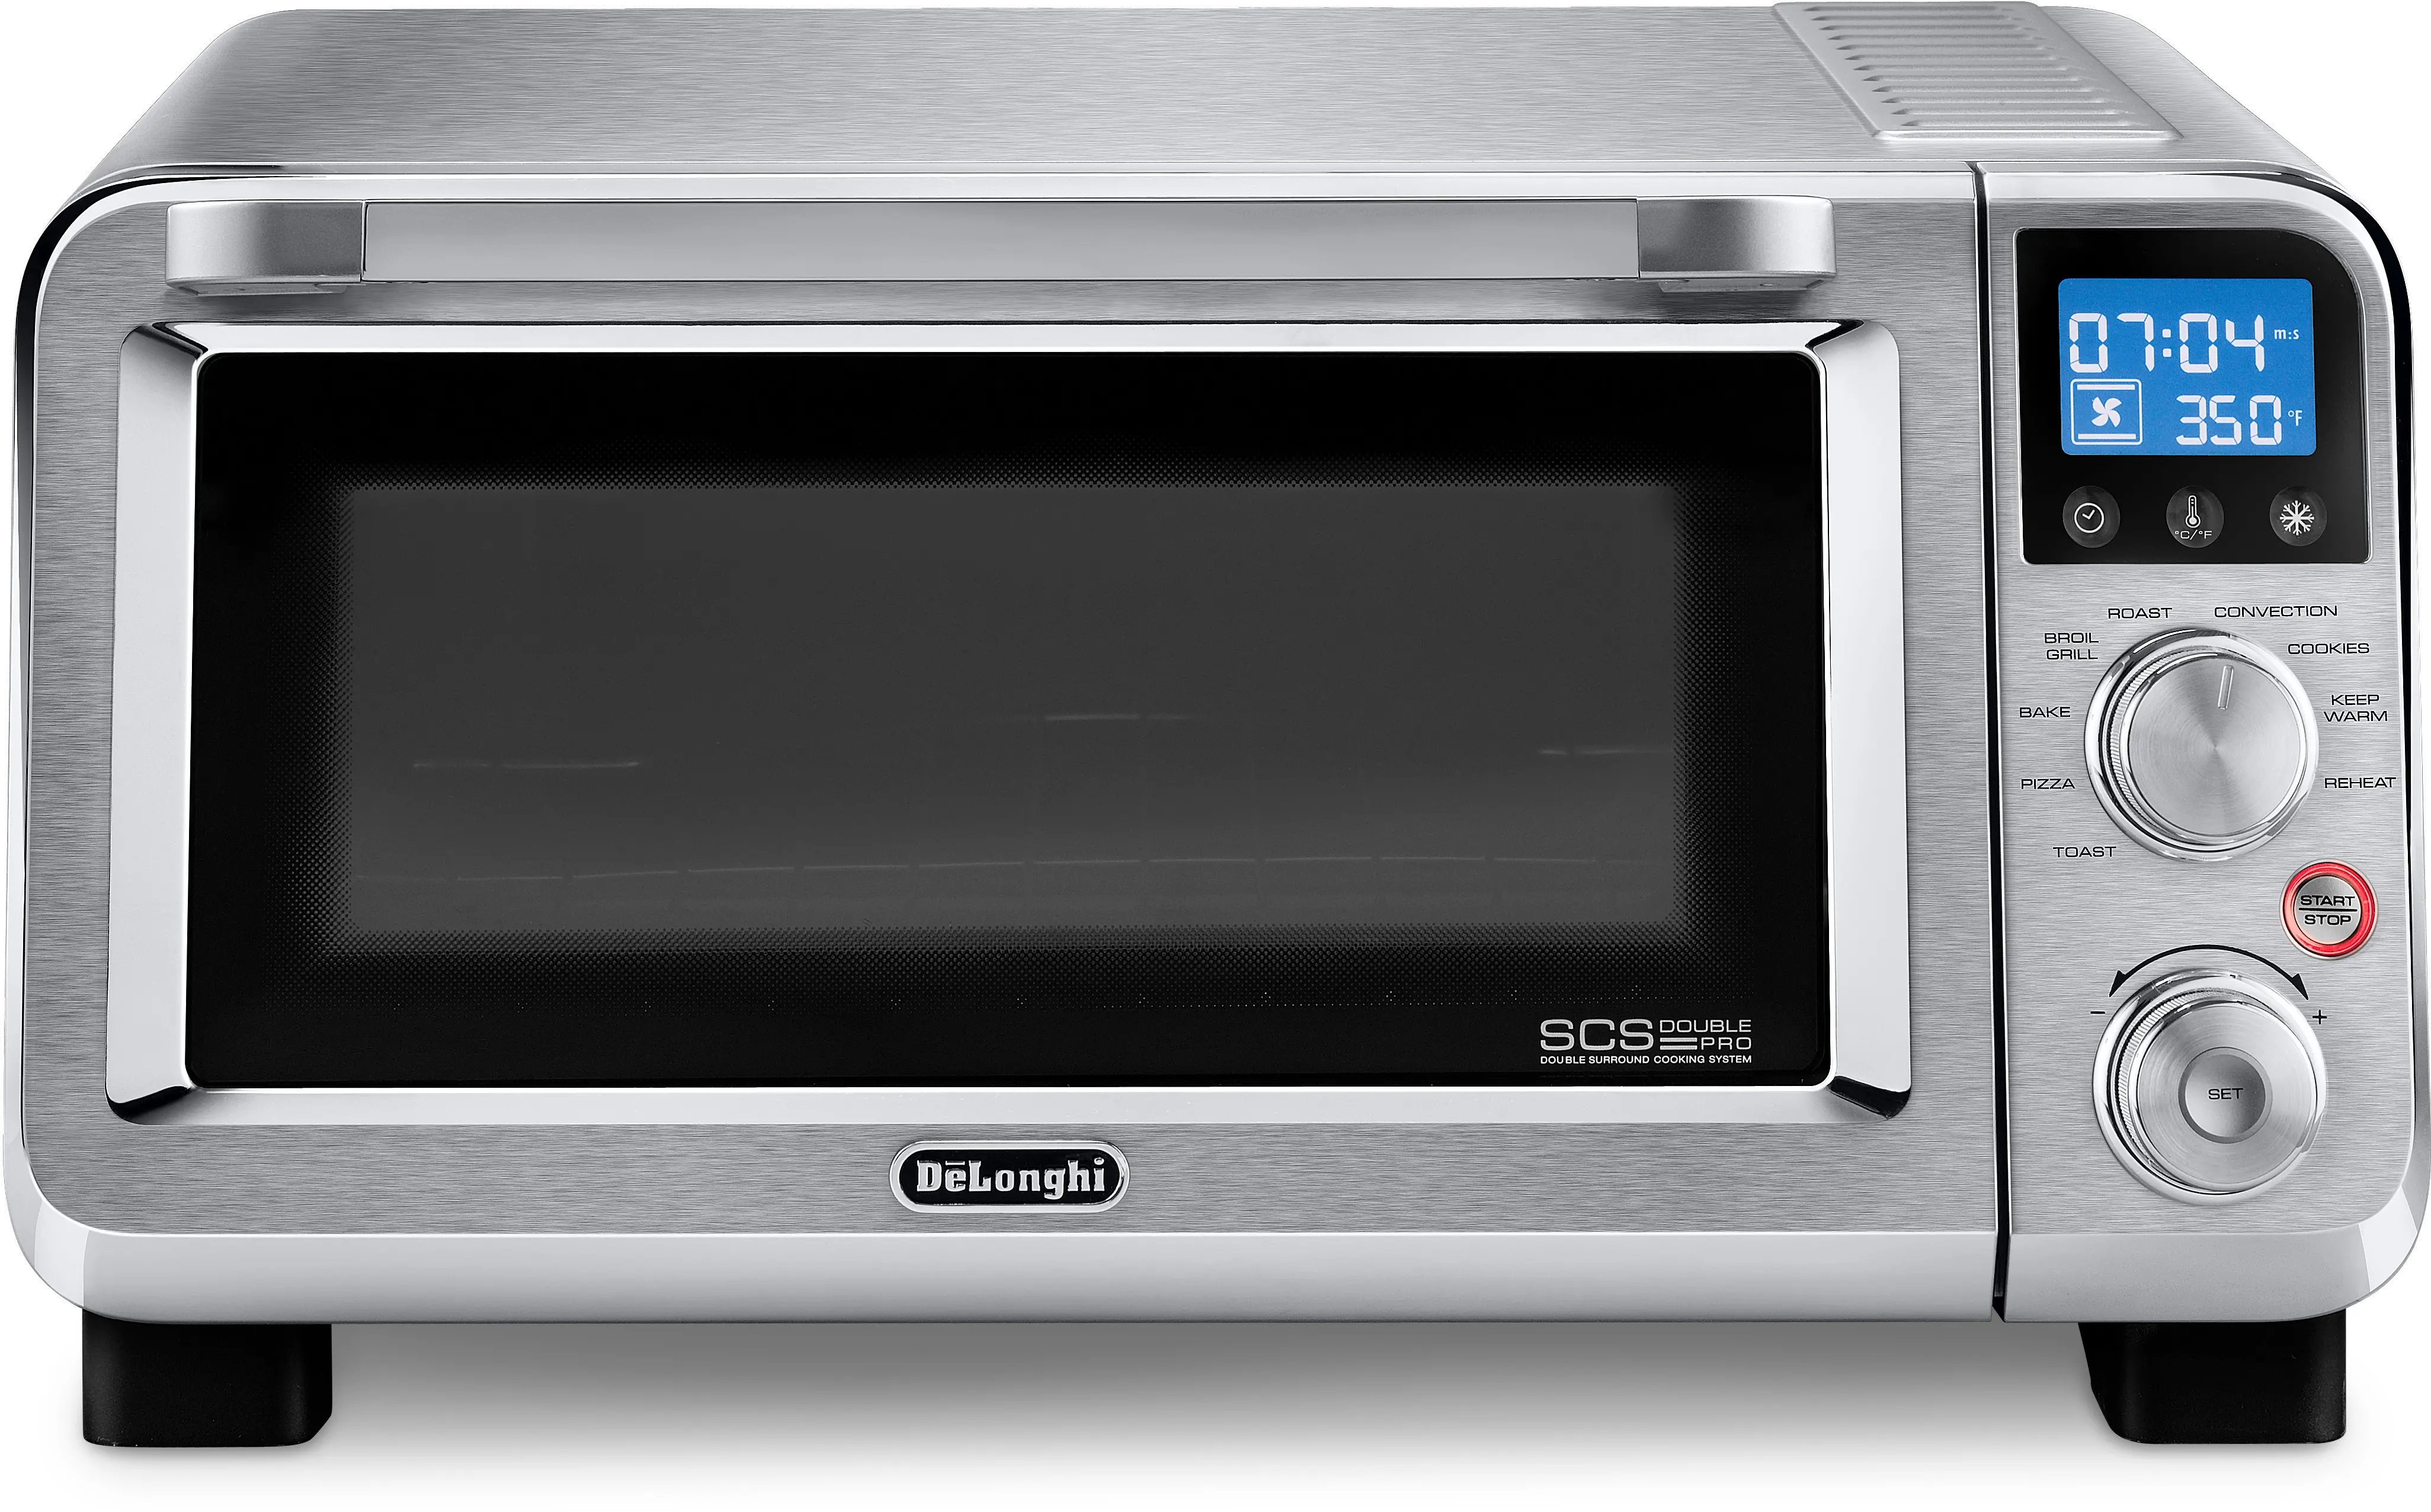 https://static.rcwilley.com/products/112930750/De-Longhi-Livenza-Digital-Convection-Oven-rcwilley-image1.webp